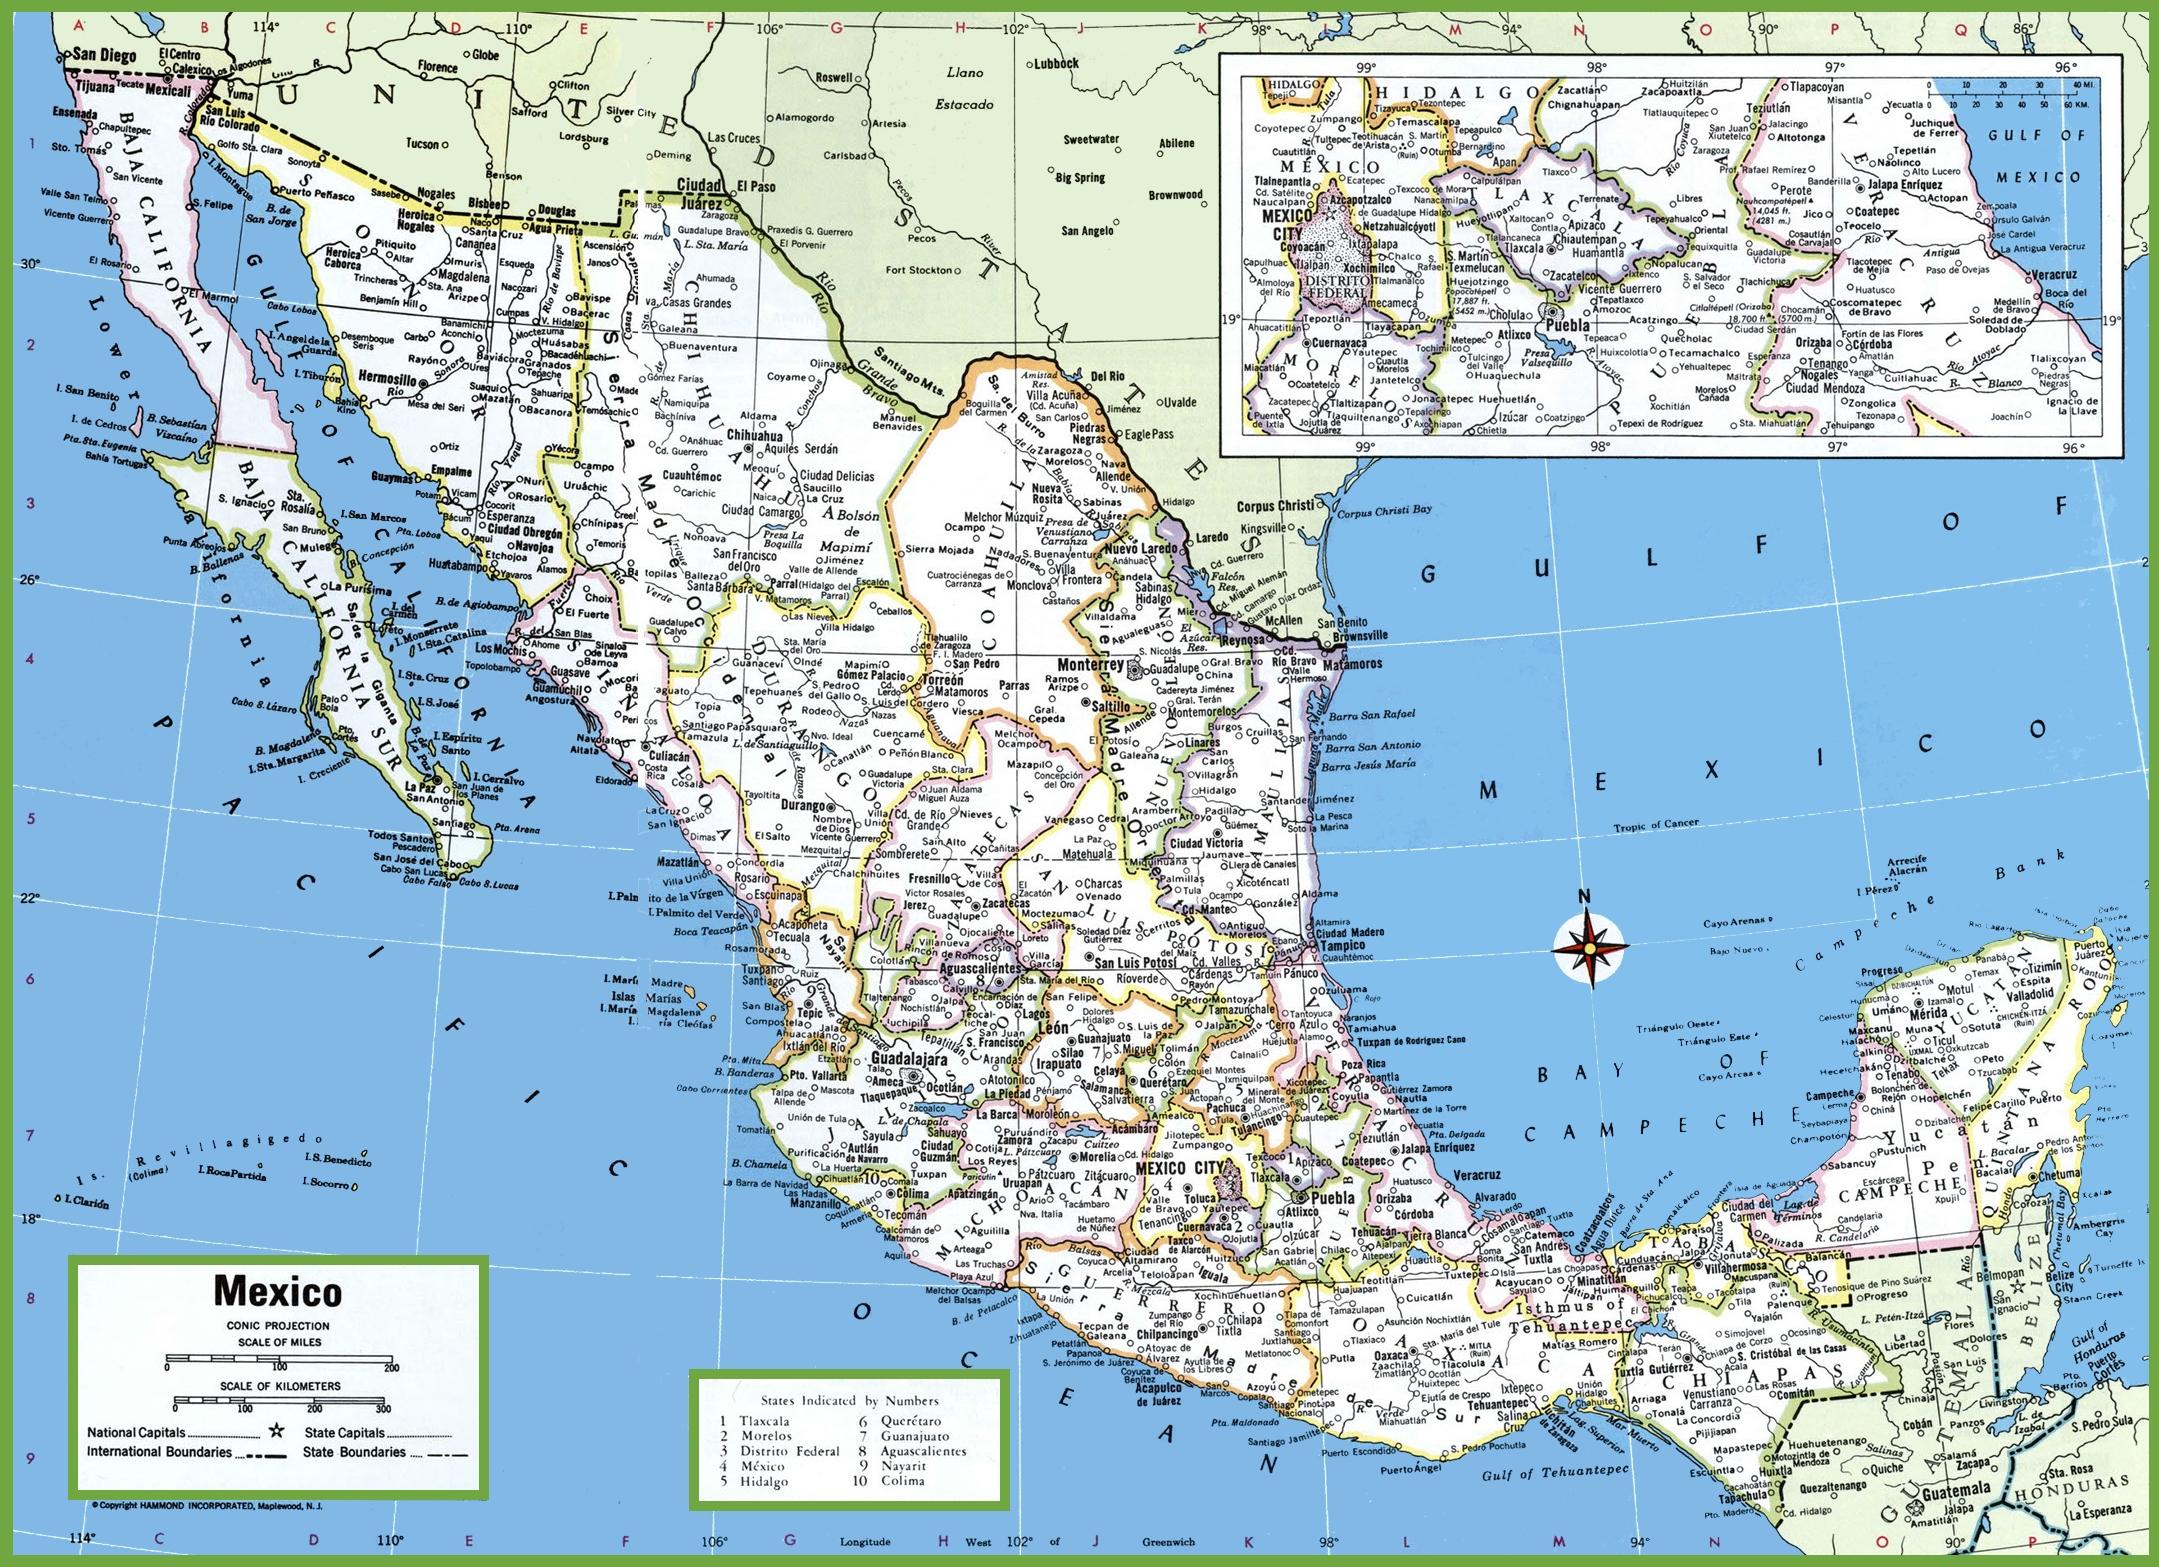 mexico-cities-map-cities-in-mexico-map-central-america-americas